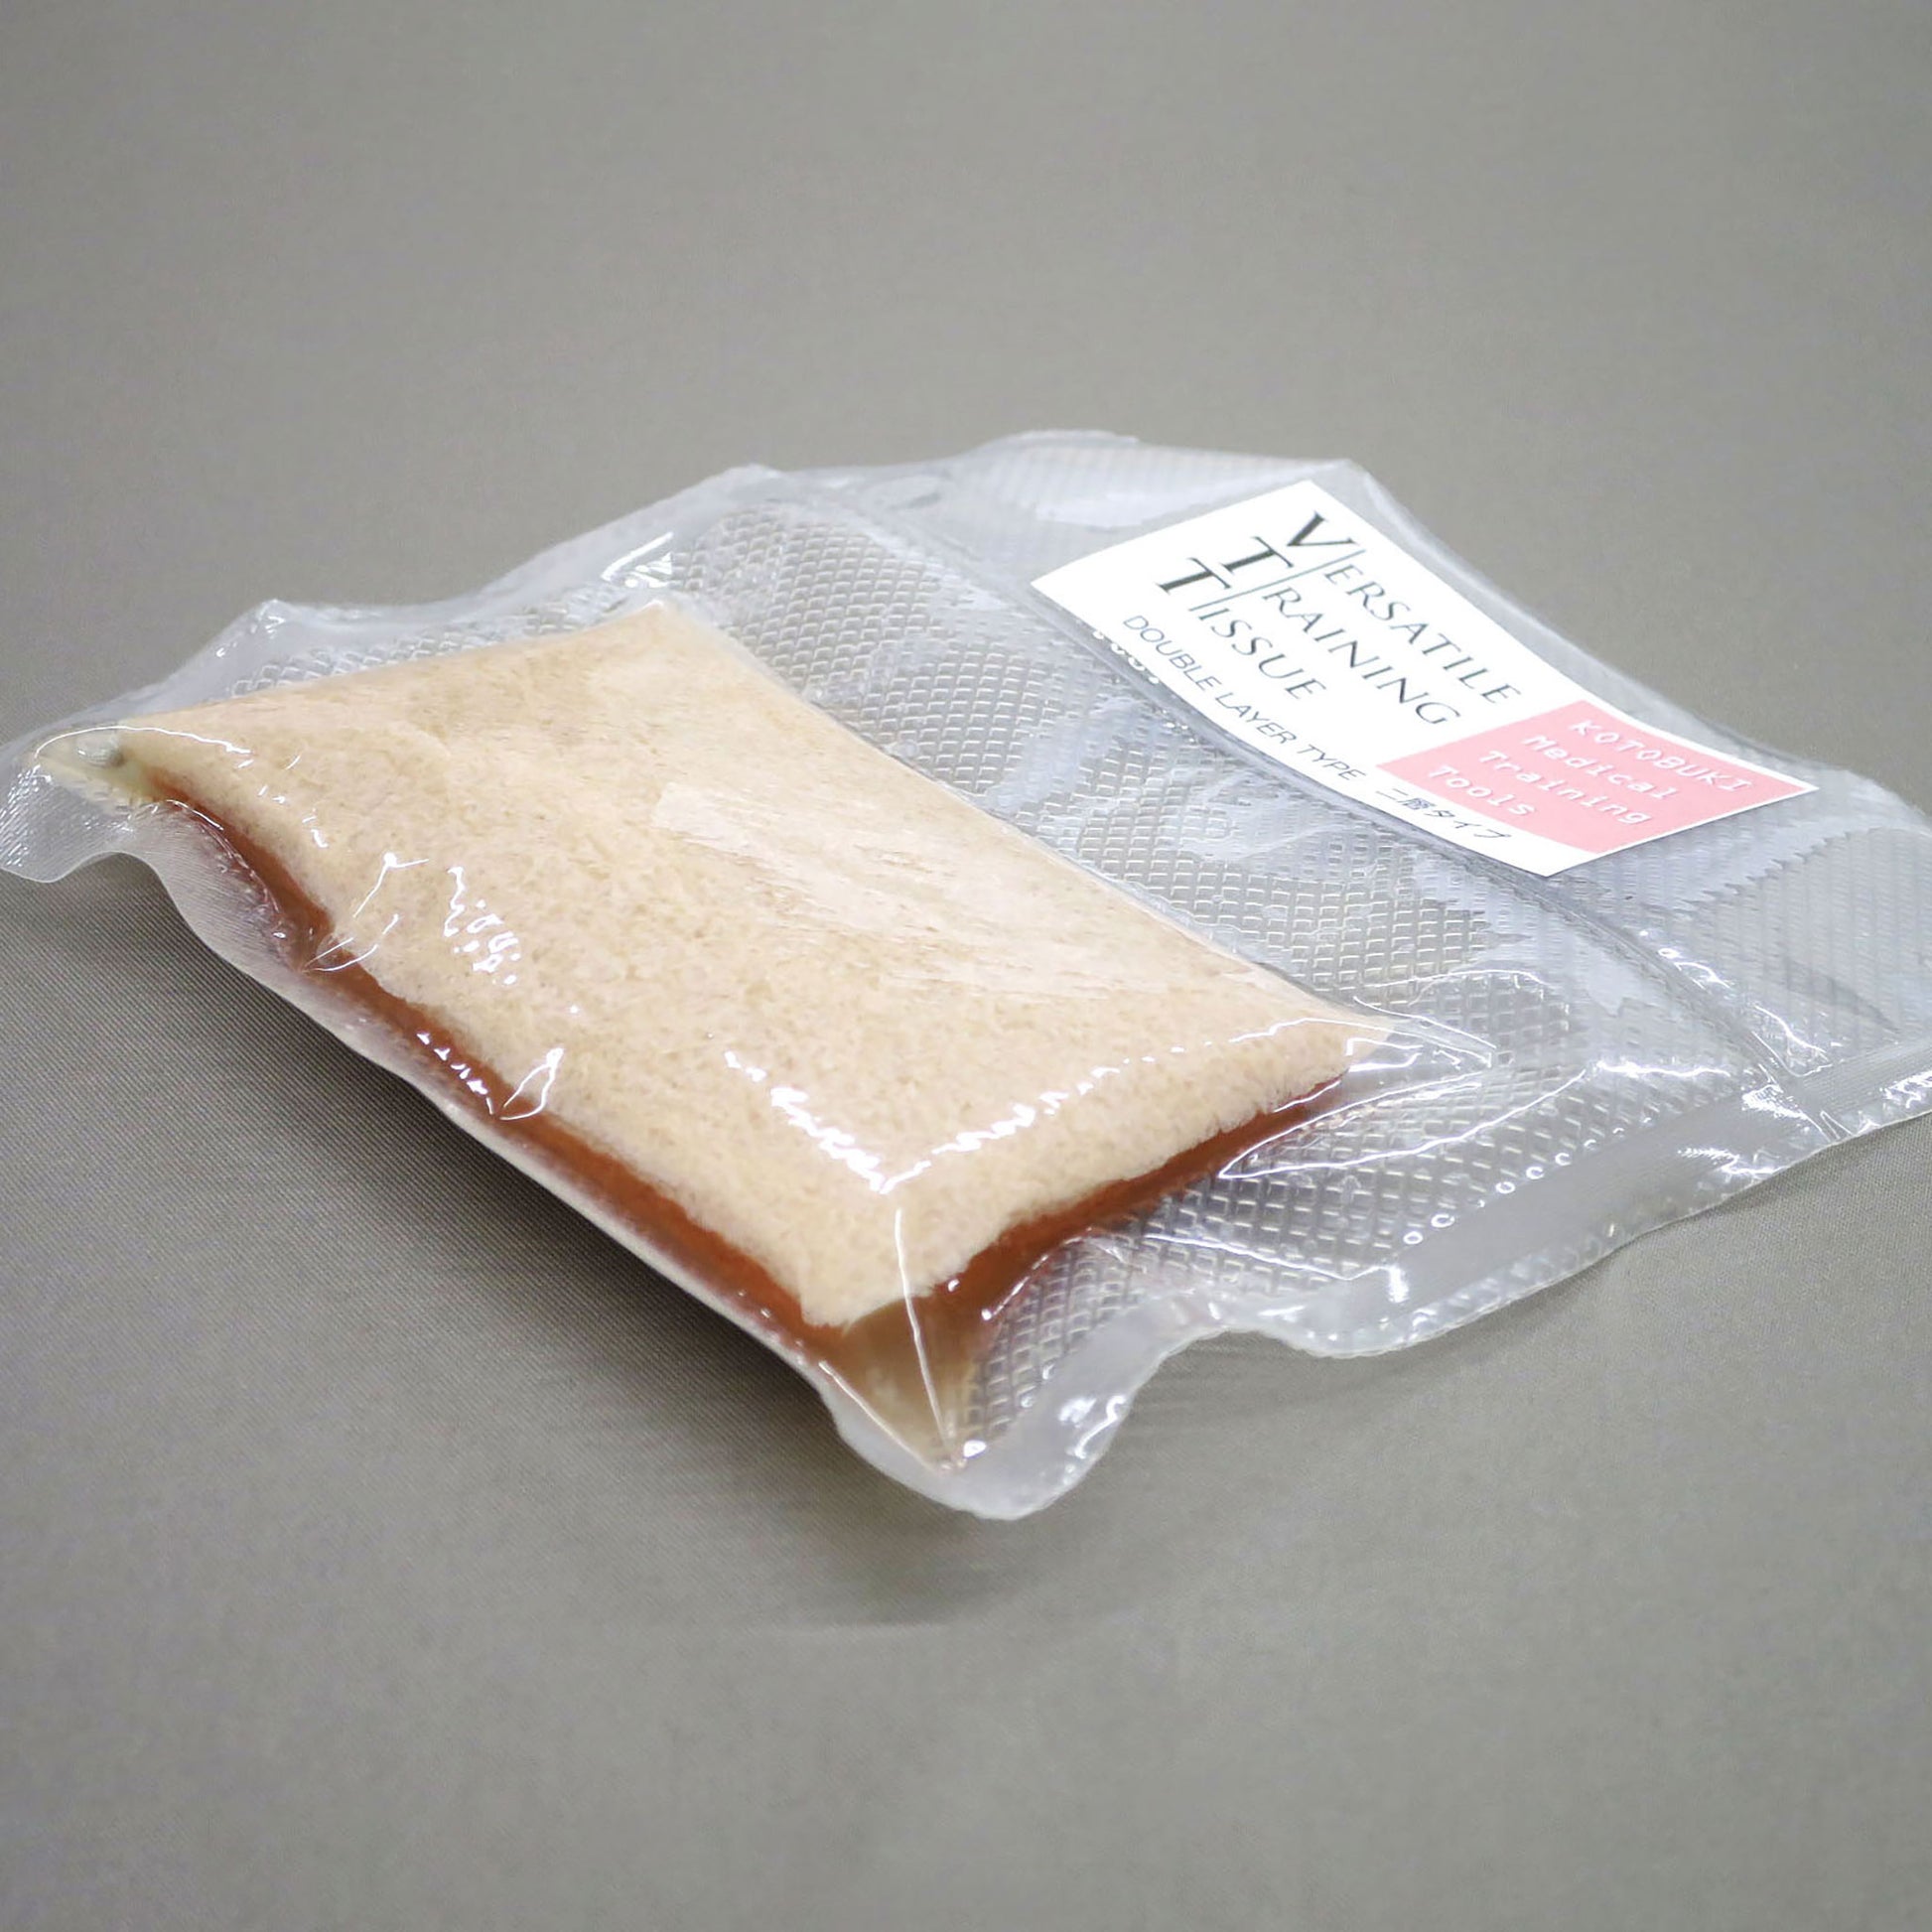 The Double Layer Type in its shrink-wrapped packaging against a grey background. When packaged, it is around 1.5 centimeters thick. 